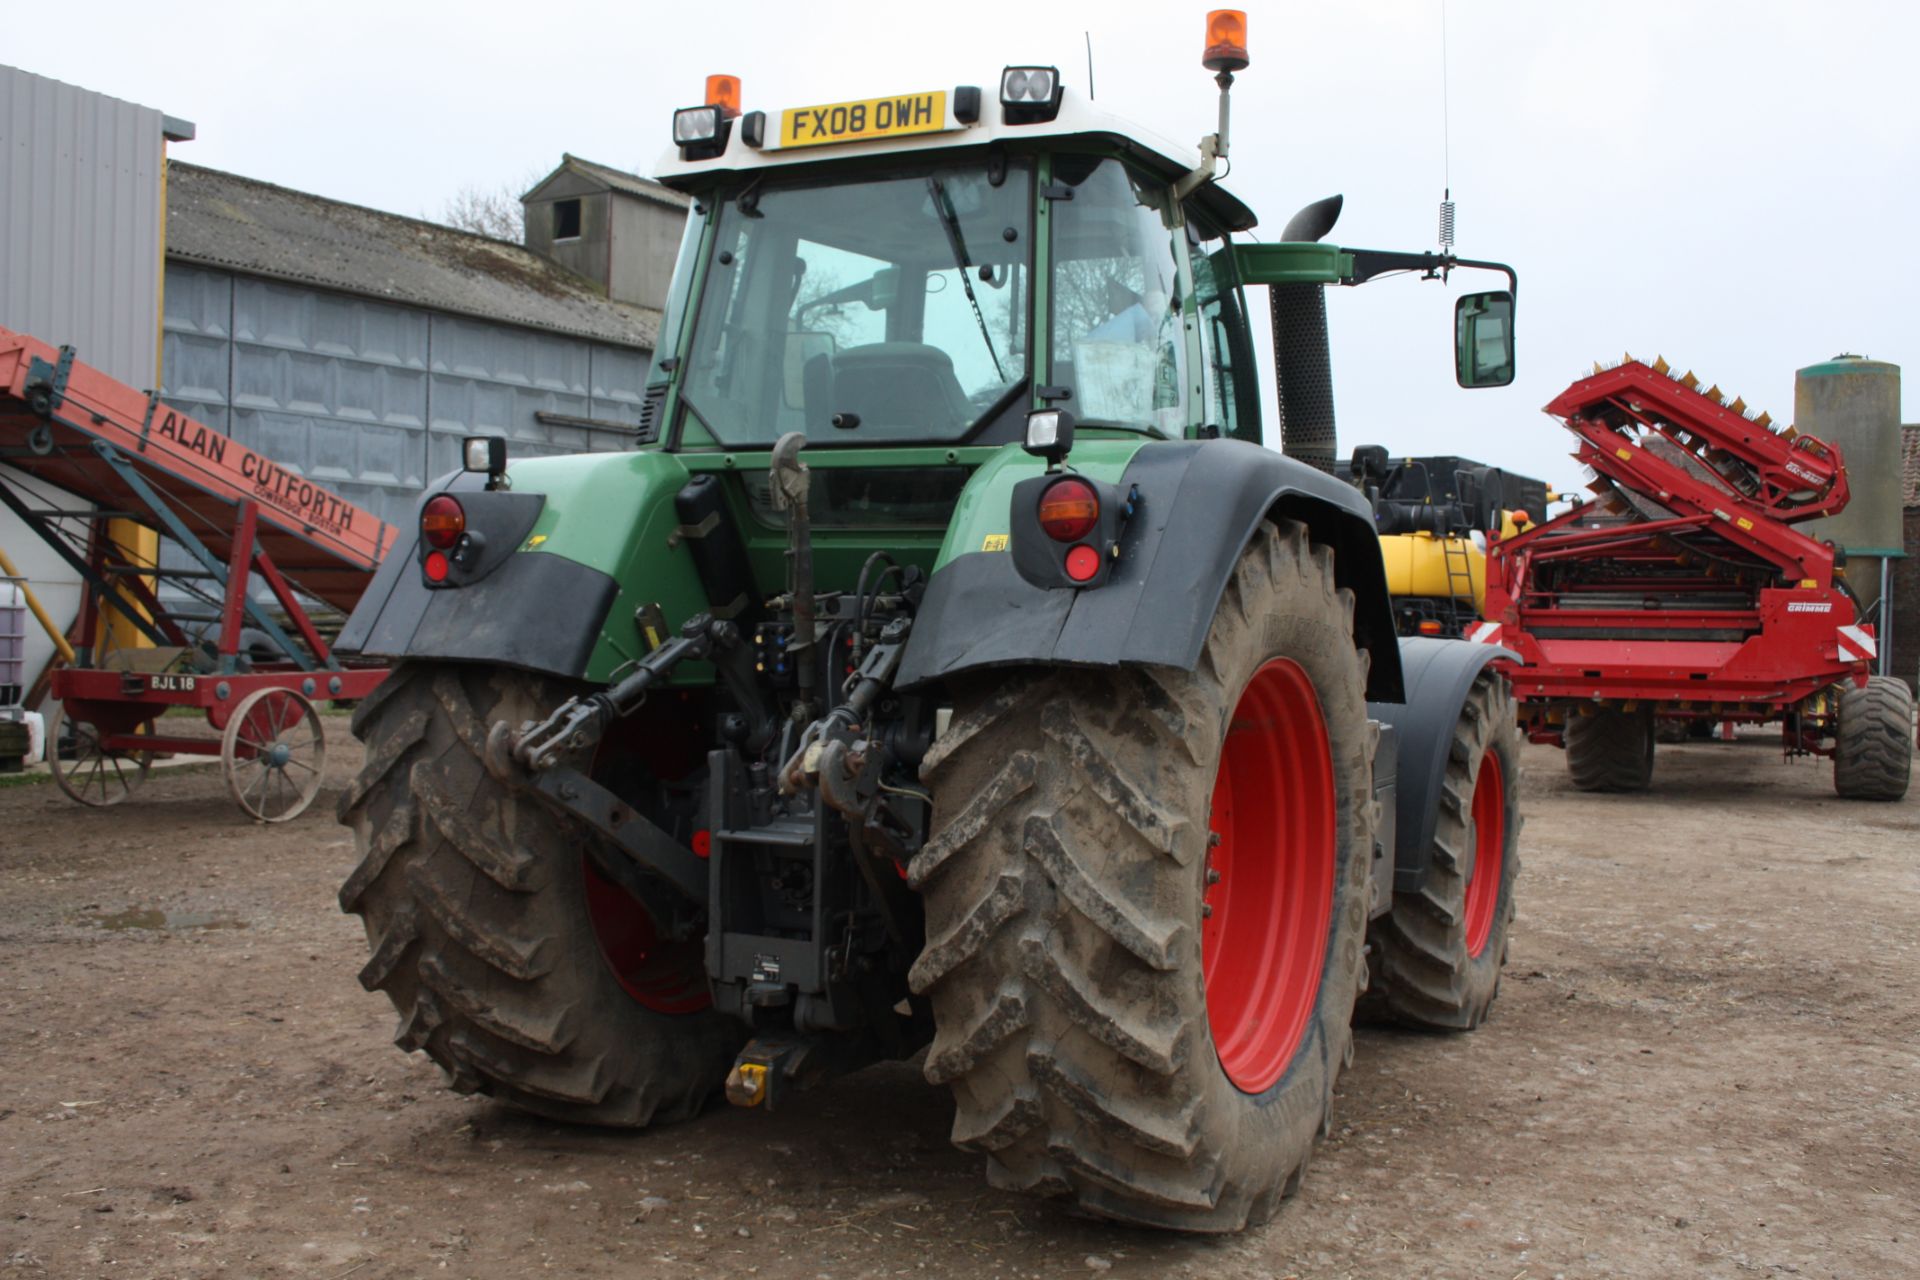 2008 Fendt 820 Vario TMS 4wd Tractor. Location - Driffield, E Yorkshire - Image 2 of 5